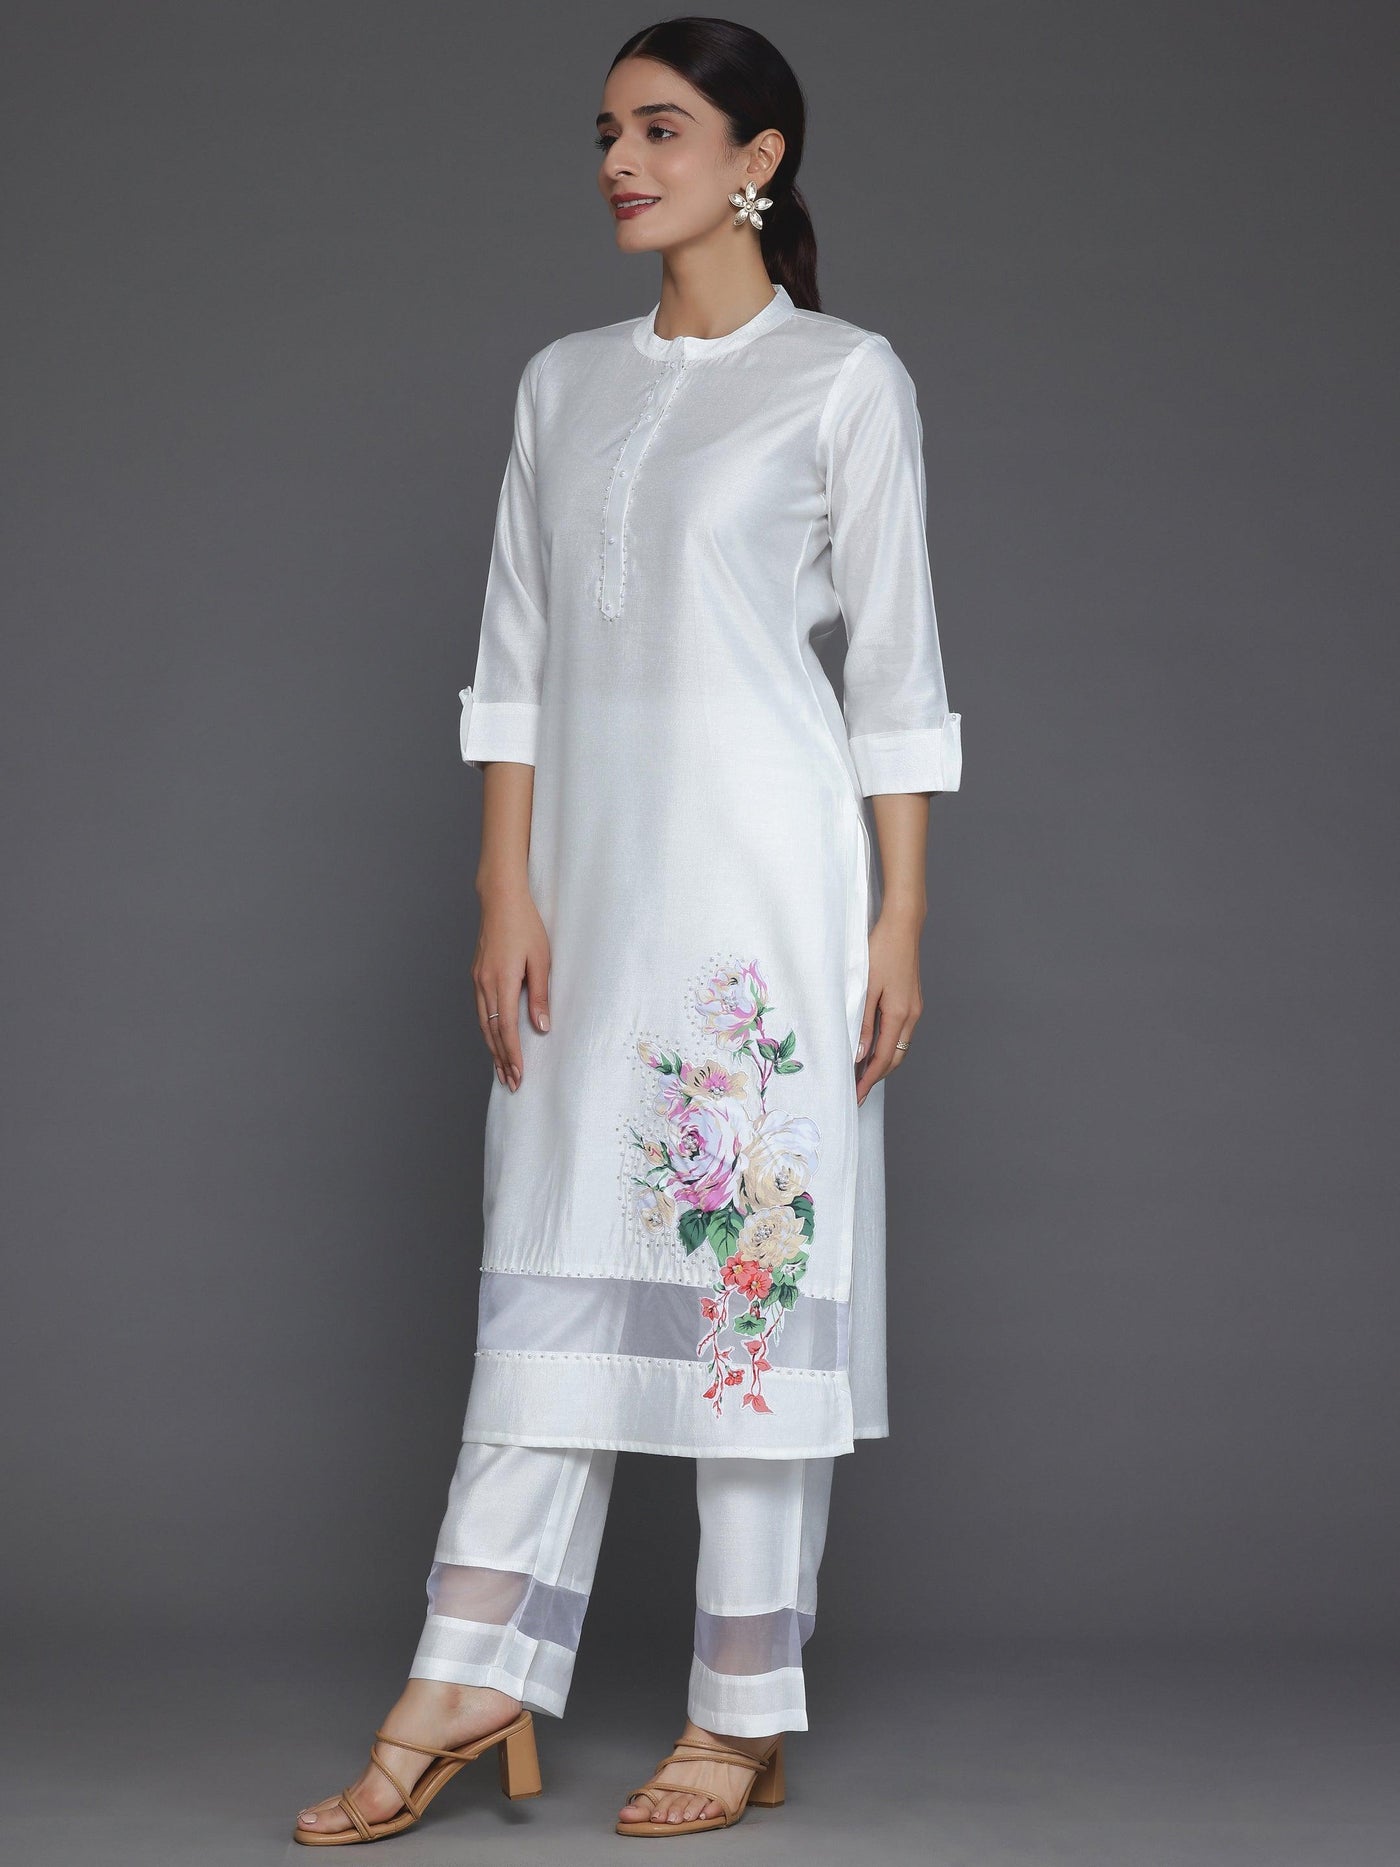 Off White Self Design Silk Blend Straight Suit With Dupatta - Libas